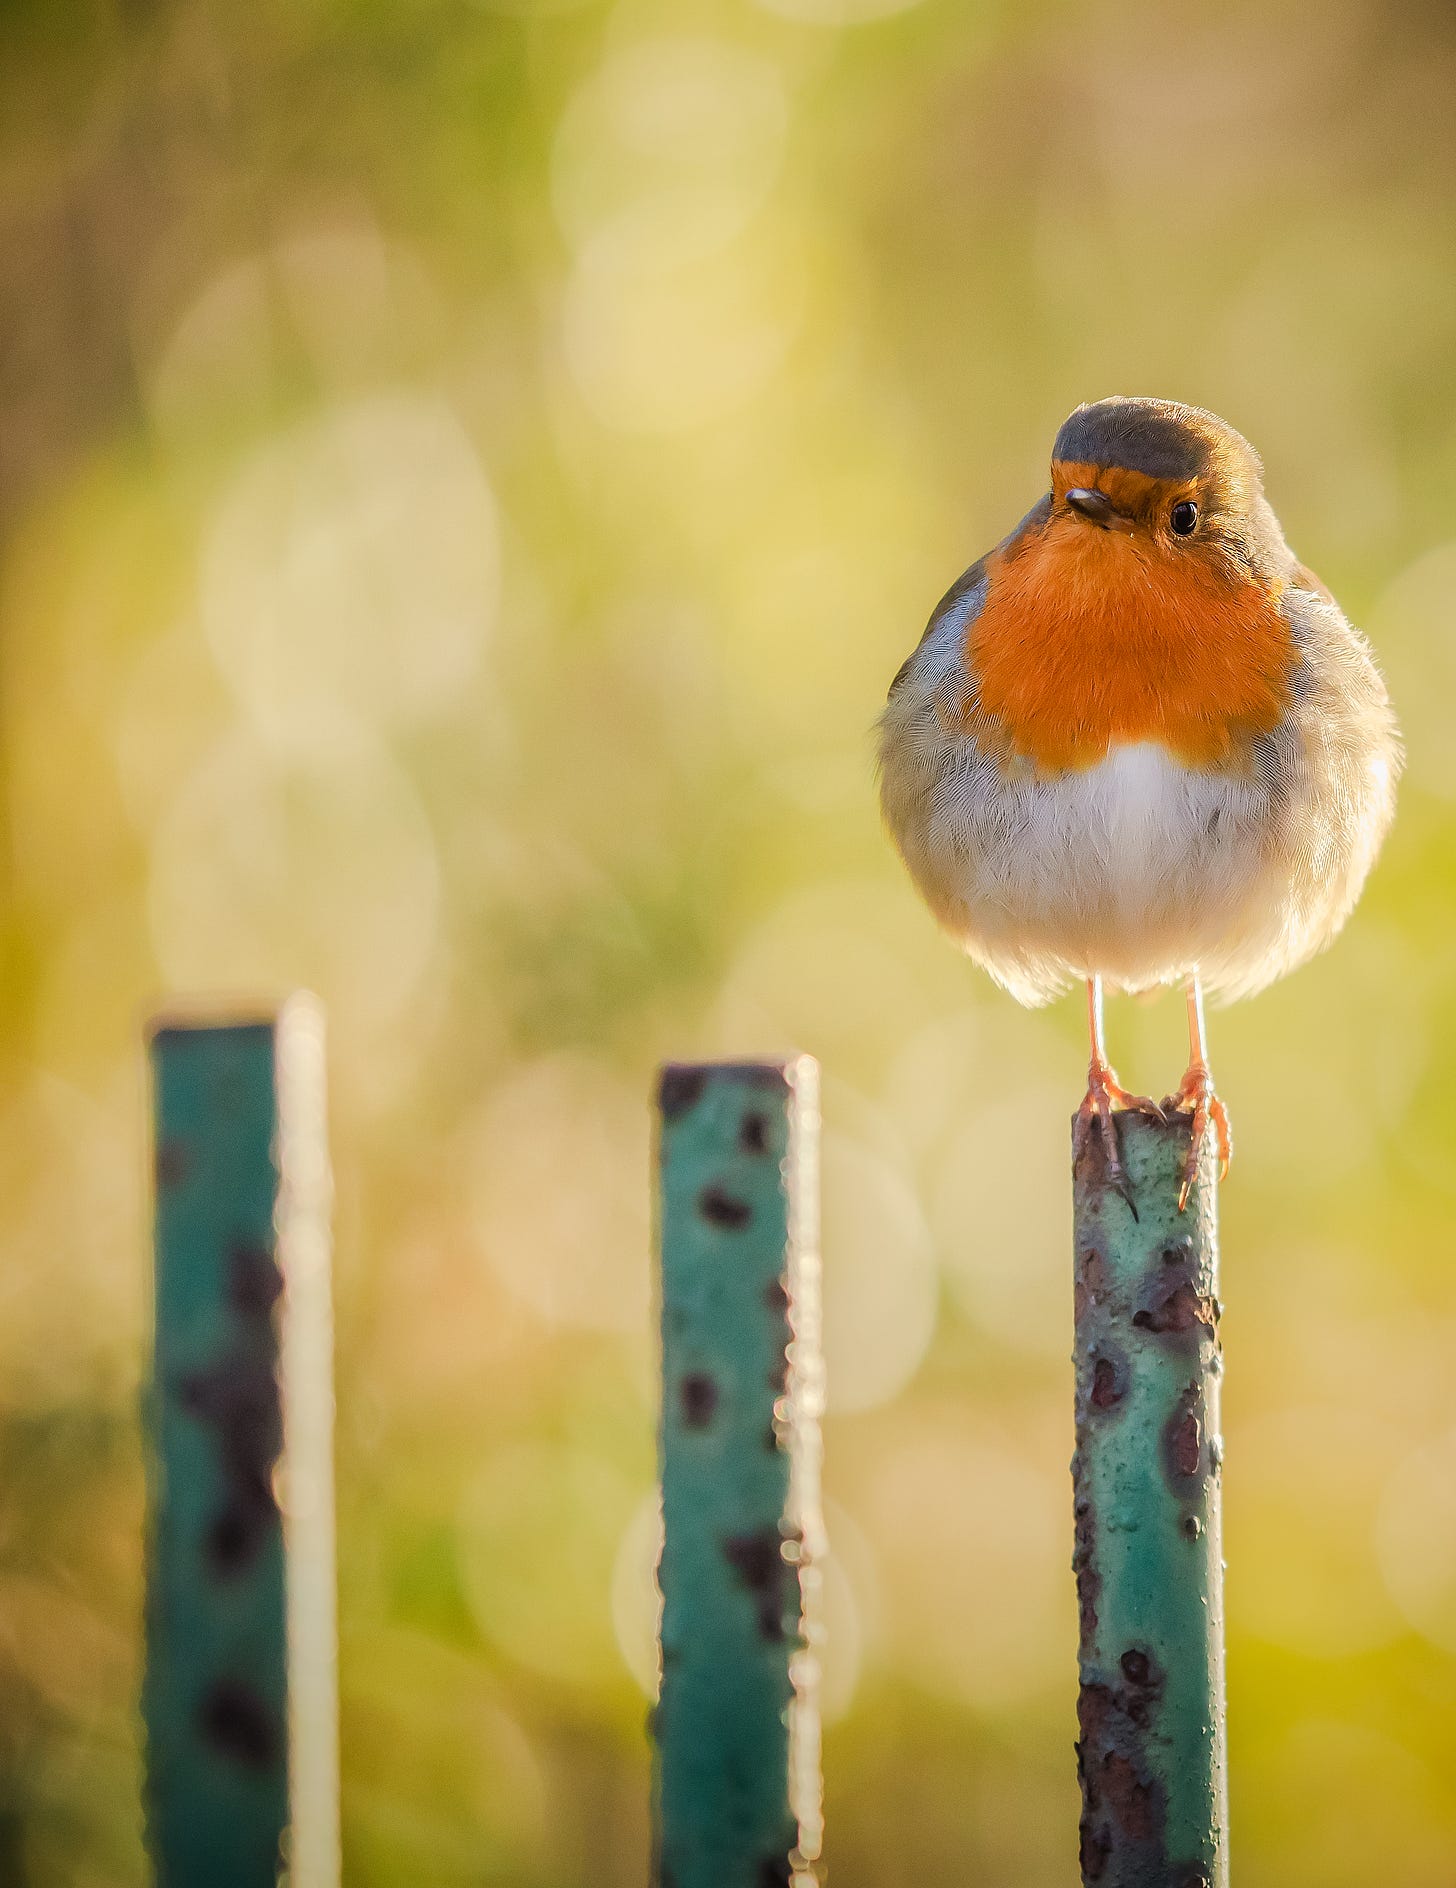 Robin sitting on a metal gate, watching the photographer intently